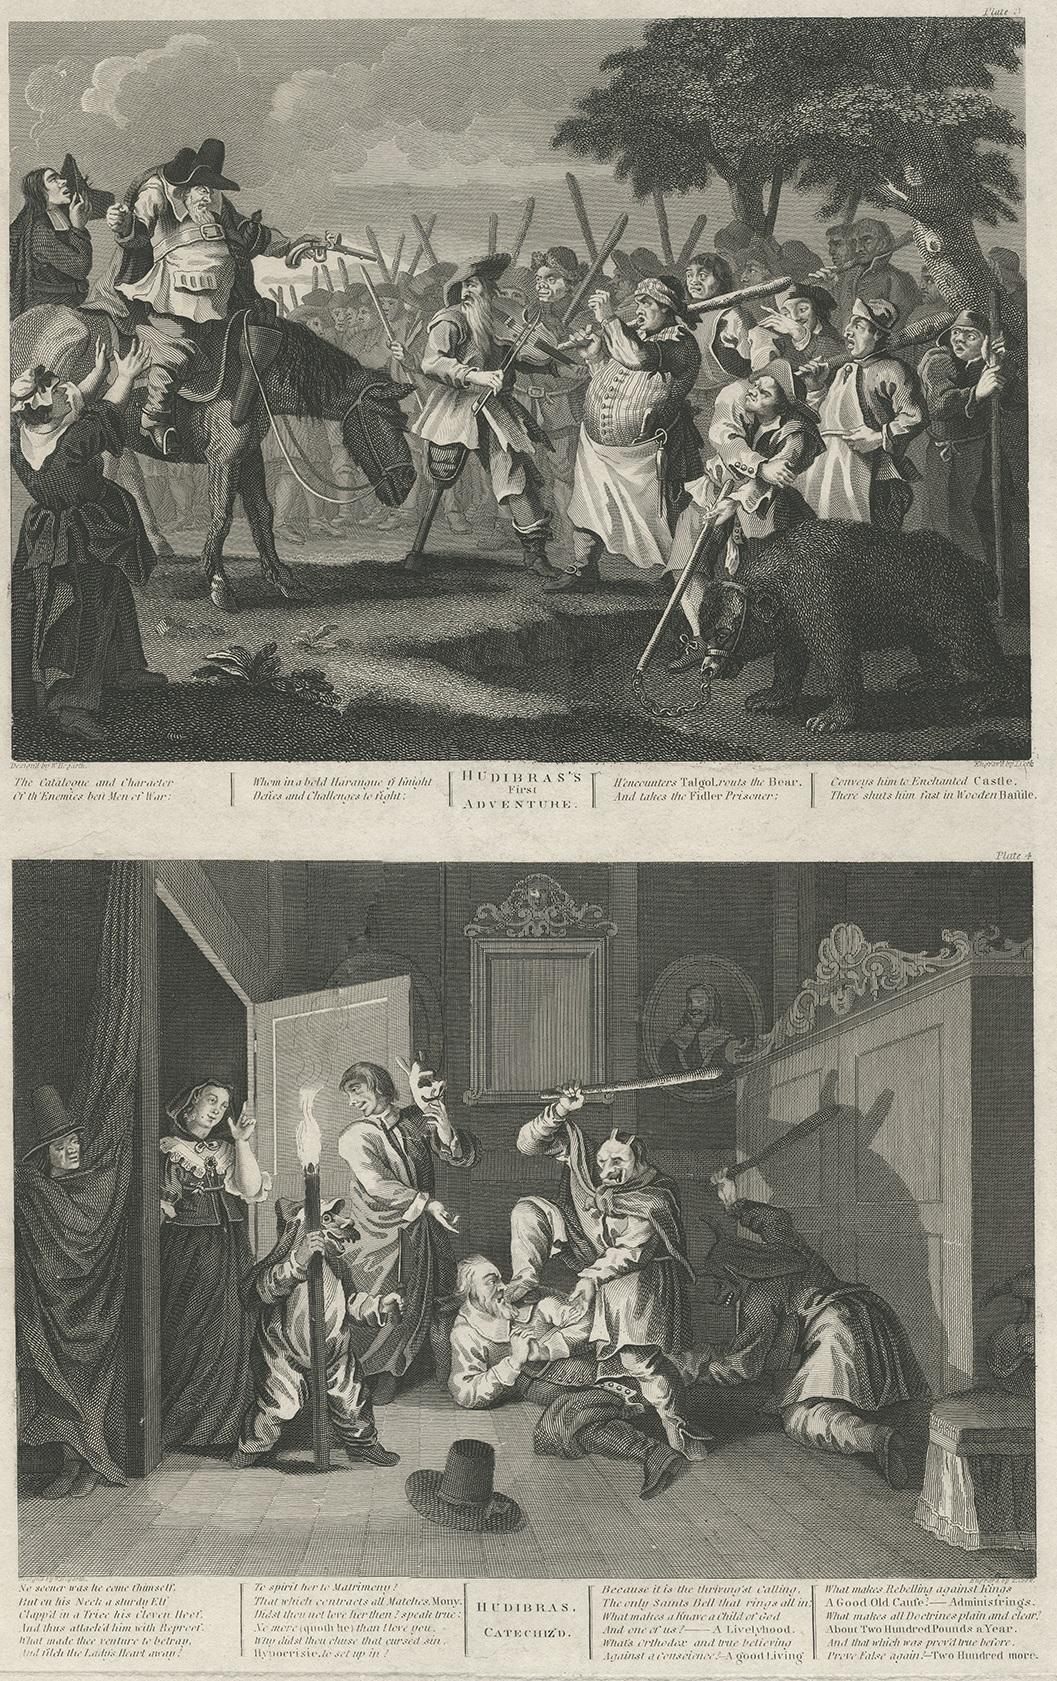 Large print with two image on one sheet. The upper image is titled 'Hudibras's first adventure'. Hudibras and Ralpho encounter a mob armed with sticks; in the foreground to right, a one-legged fiddler, a butcher and a dancing bear with his leader.